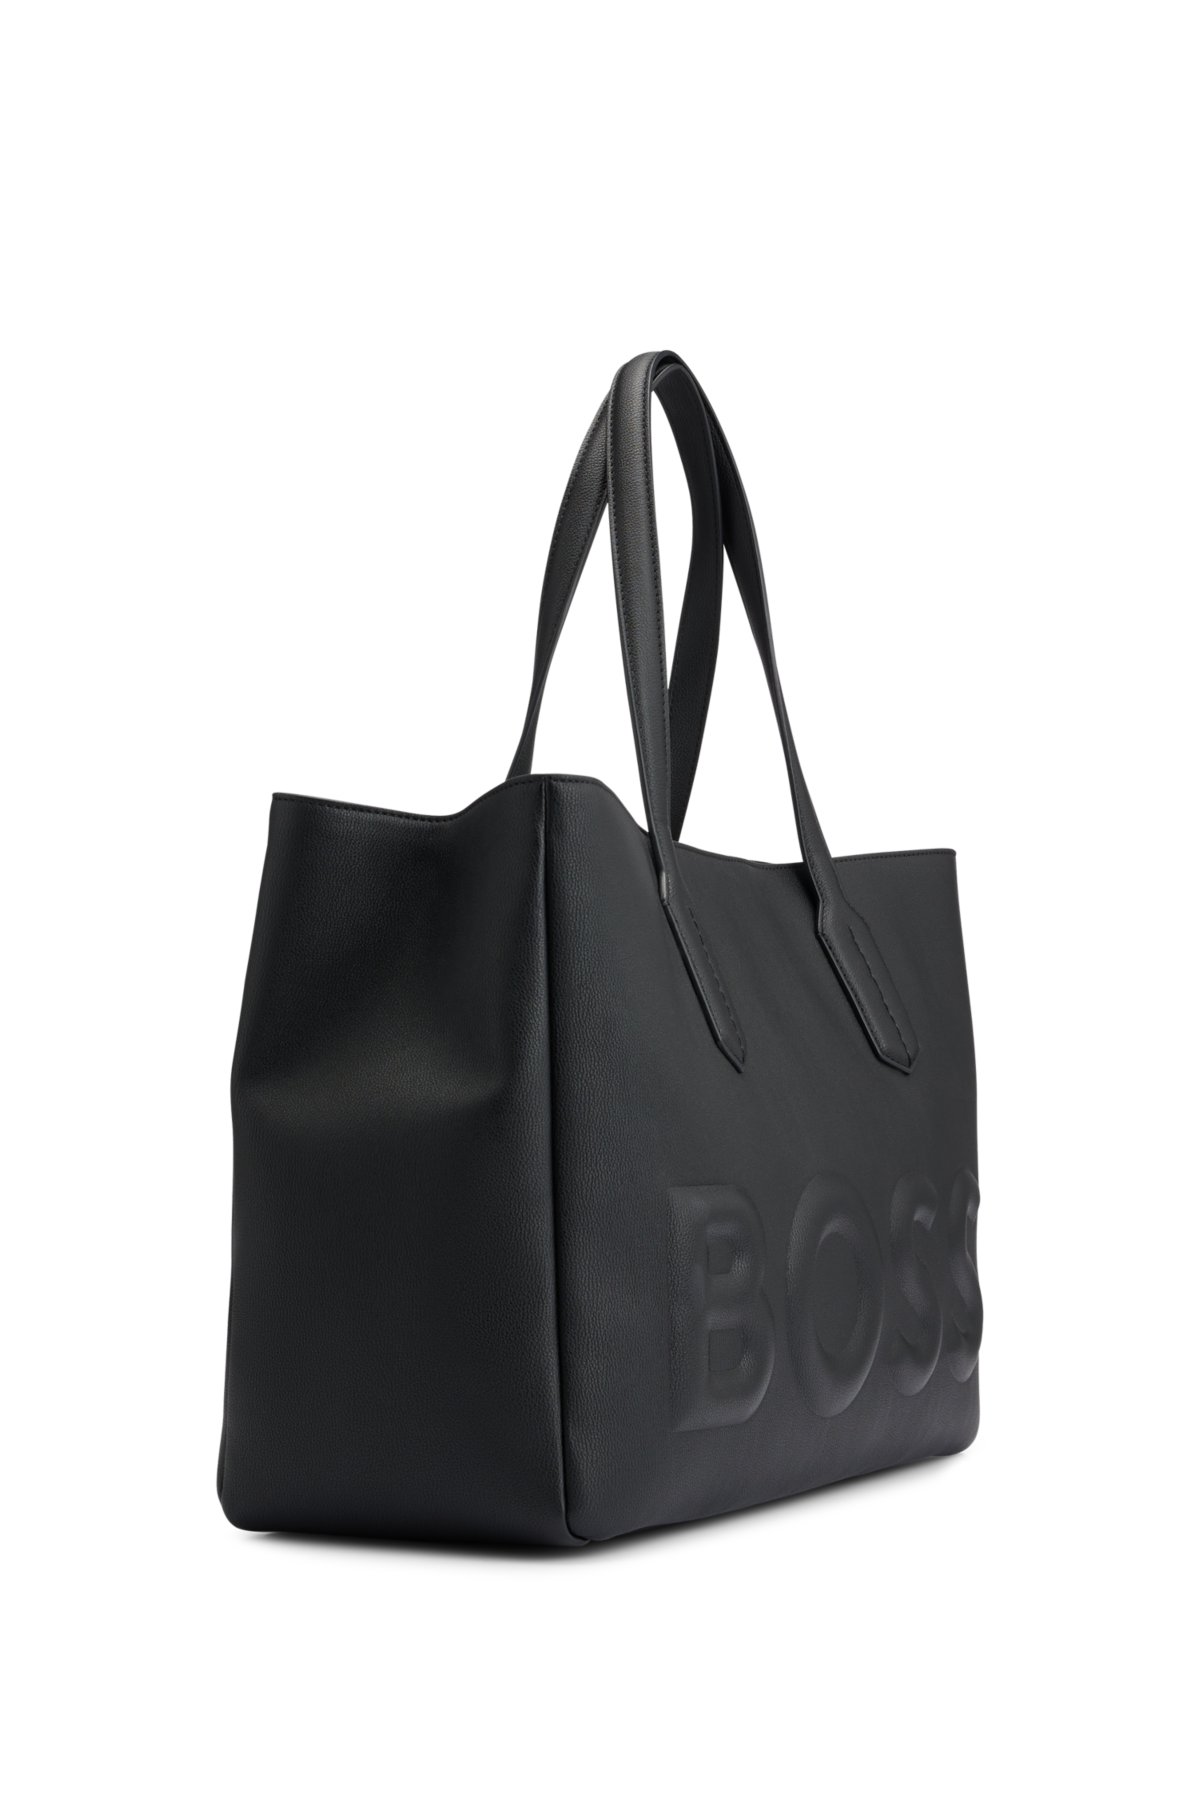 faux BOSS Tote leather - logo debossed in bag with